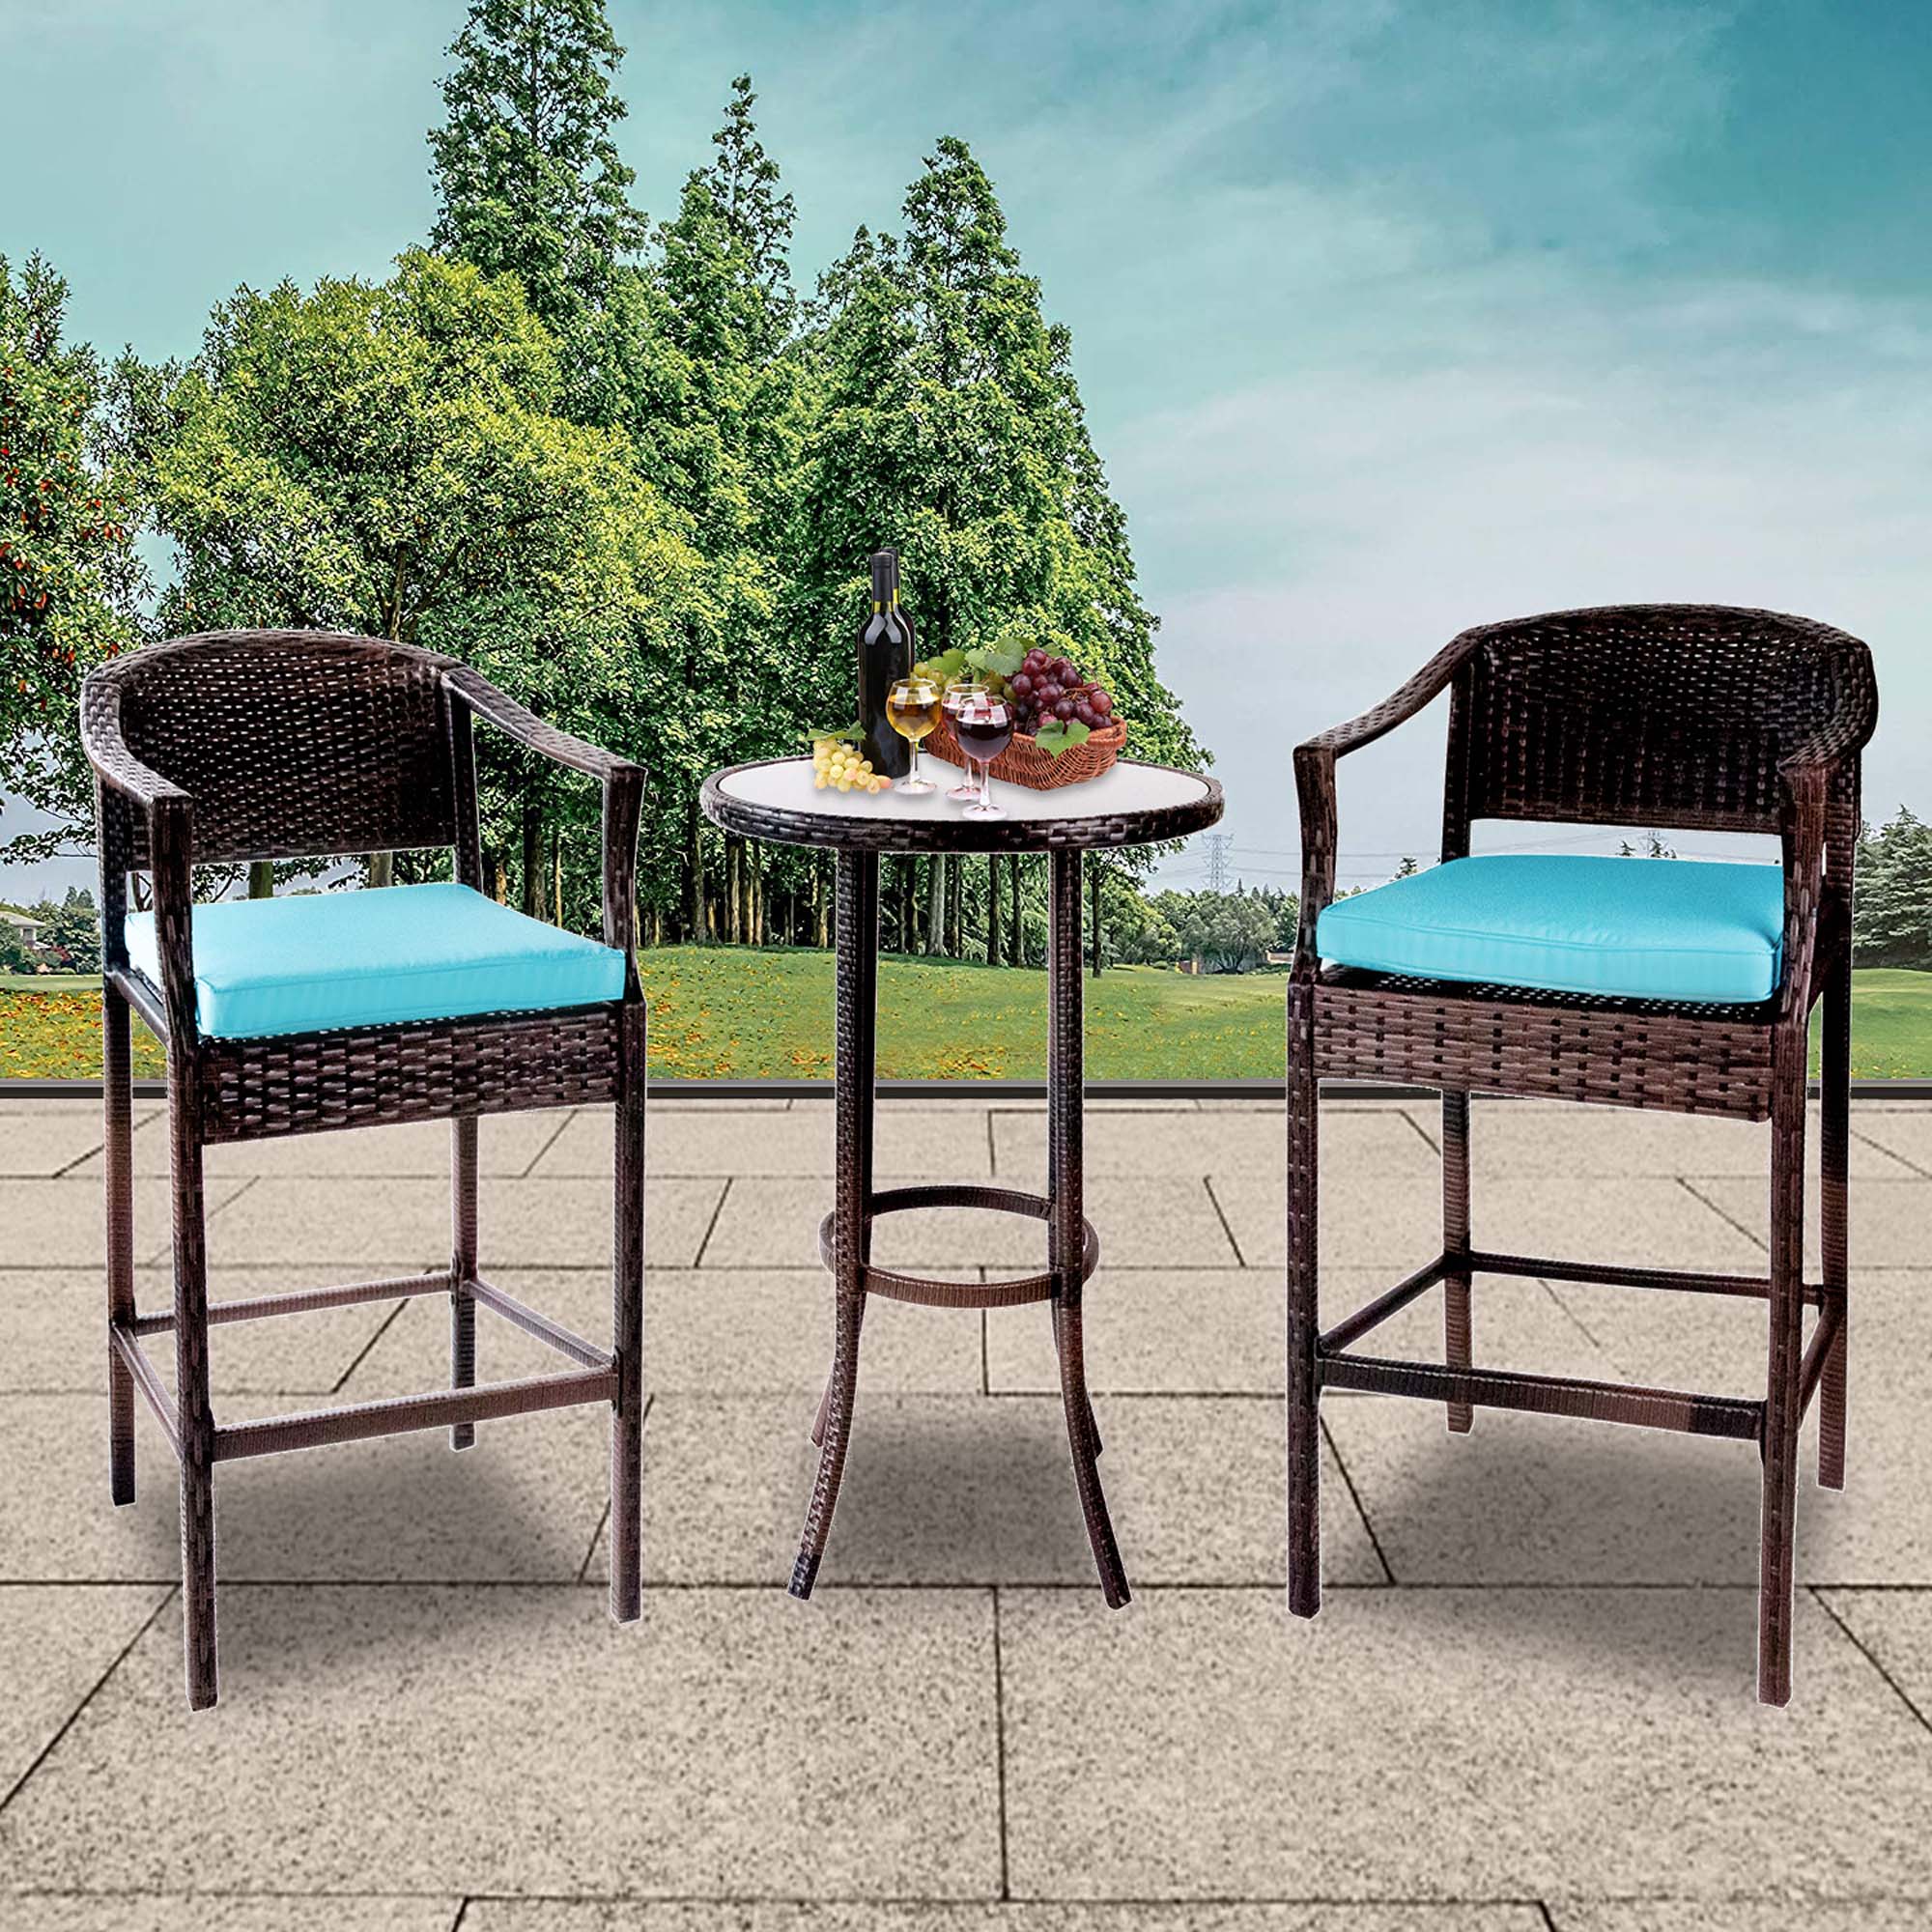 Lightweight Patio Bistro Set, 3 Piece Outdoor Bar Table & Chairs Set, 2 High Bar Chairs & 1 High Glass Top Table, All Weather Metal Frame Furniture Set, Outdoor Patio Set for Garden Yard Cafe, T156 - image 1 of 8